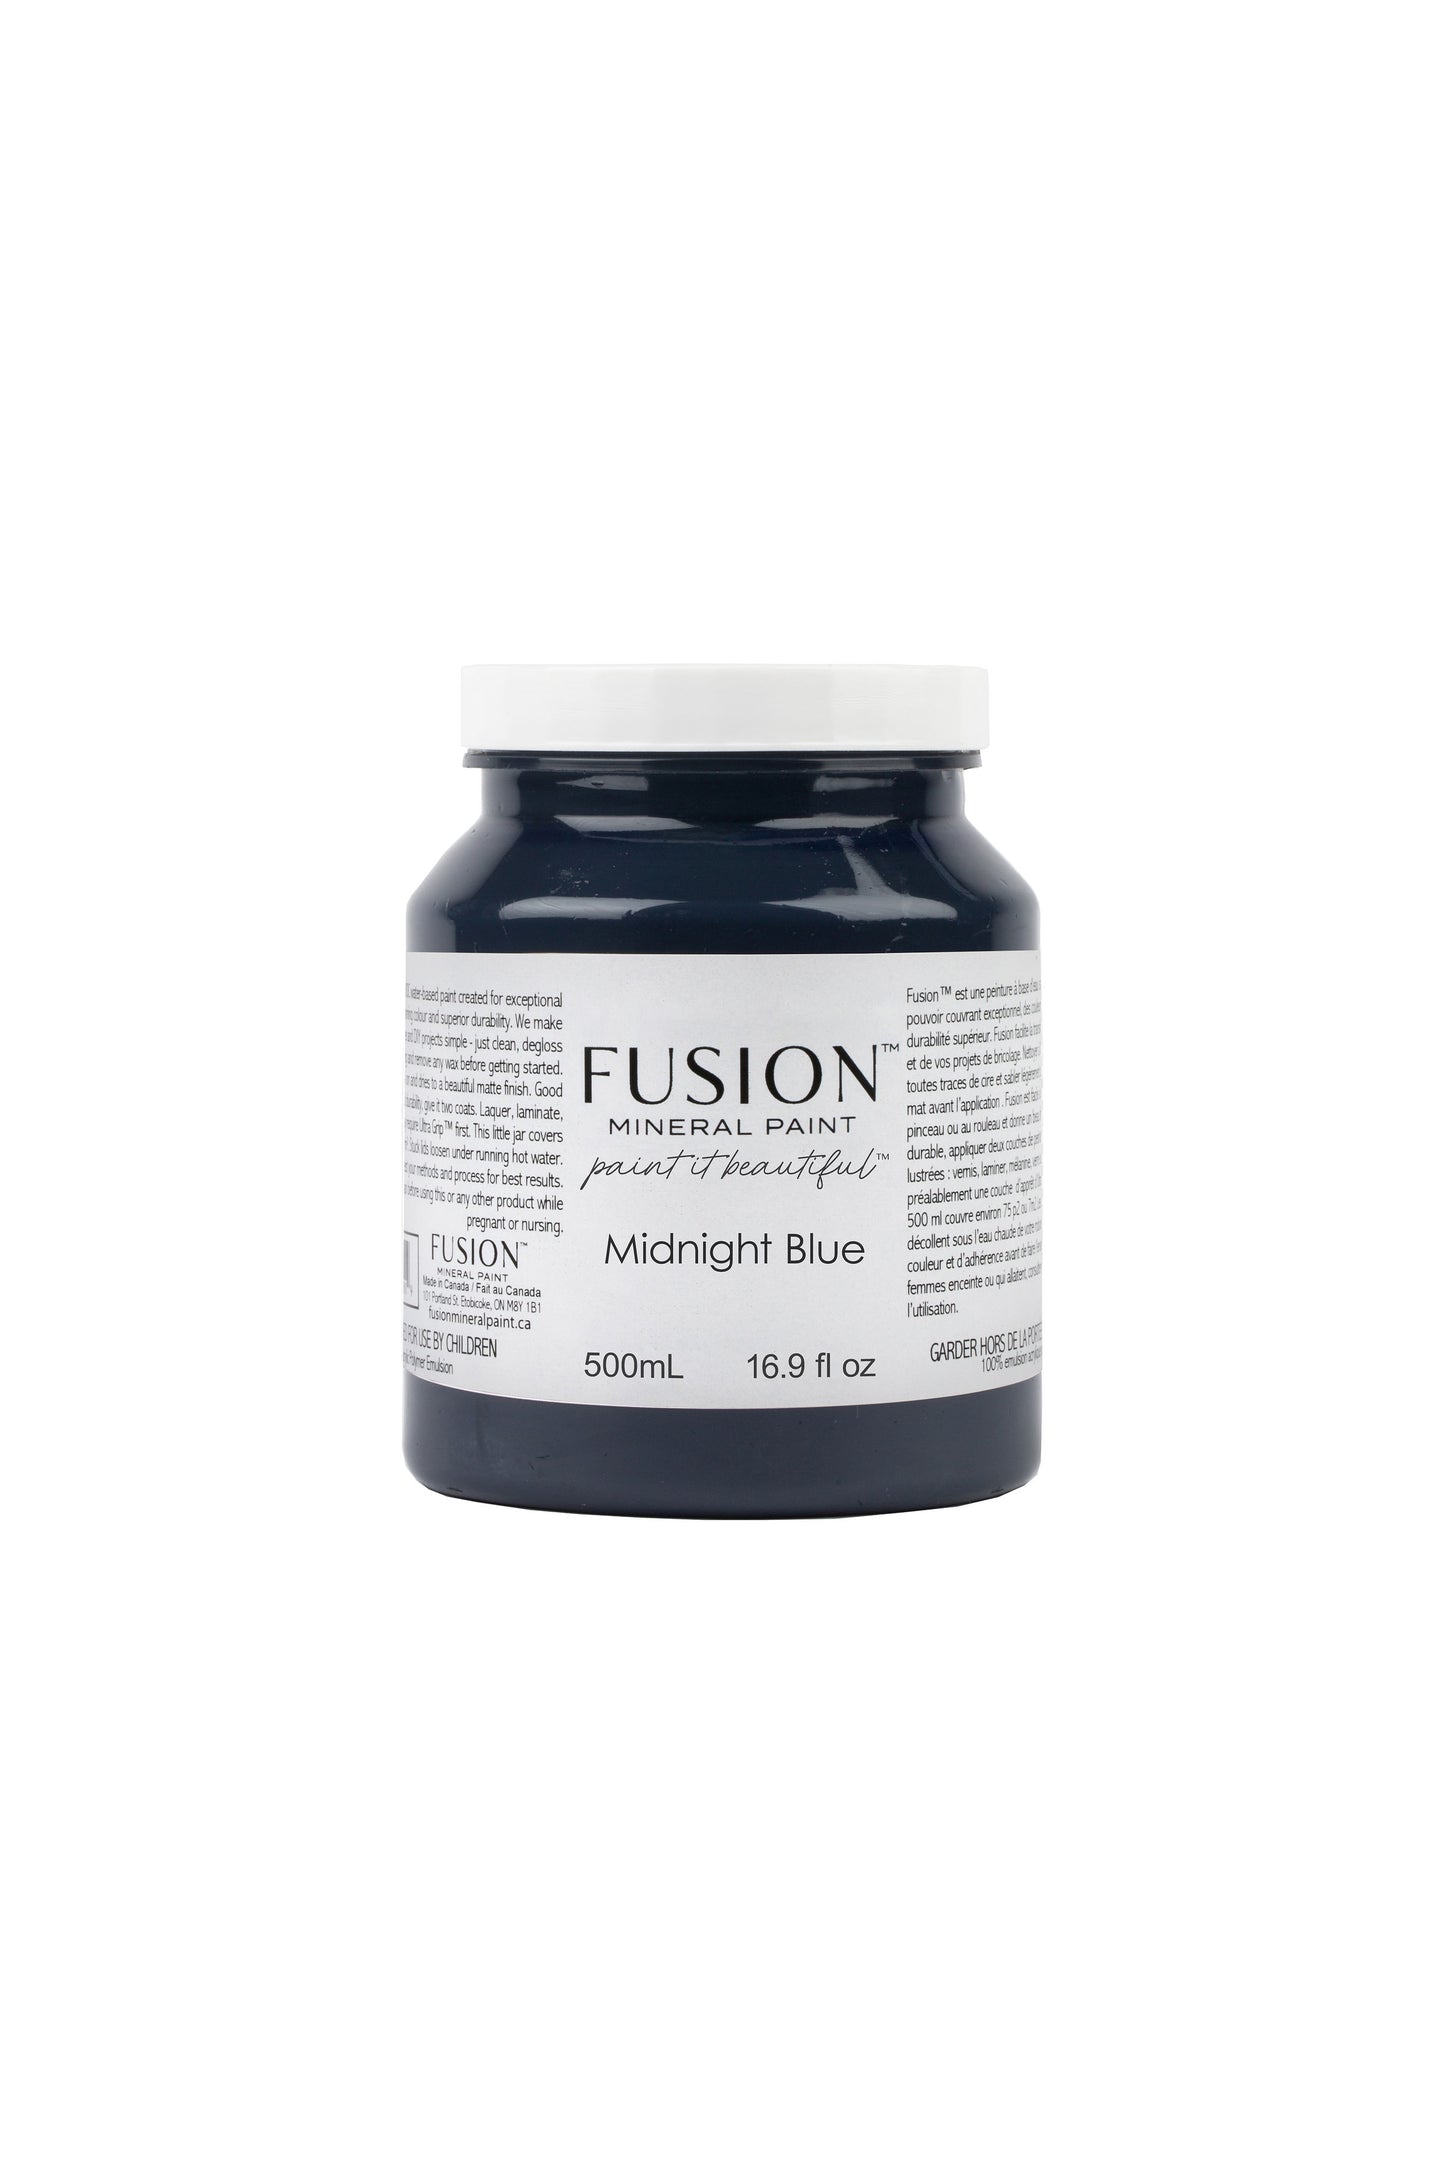 FUSION MINERAL PAINT- Midnight Blue